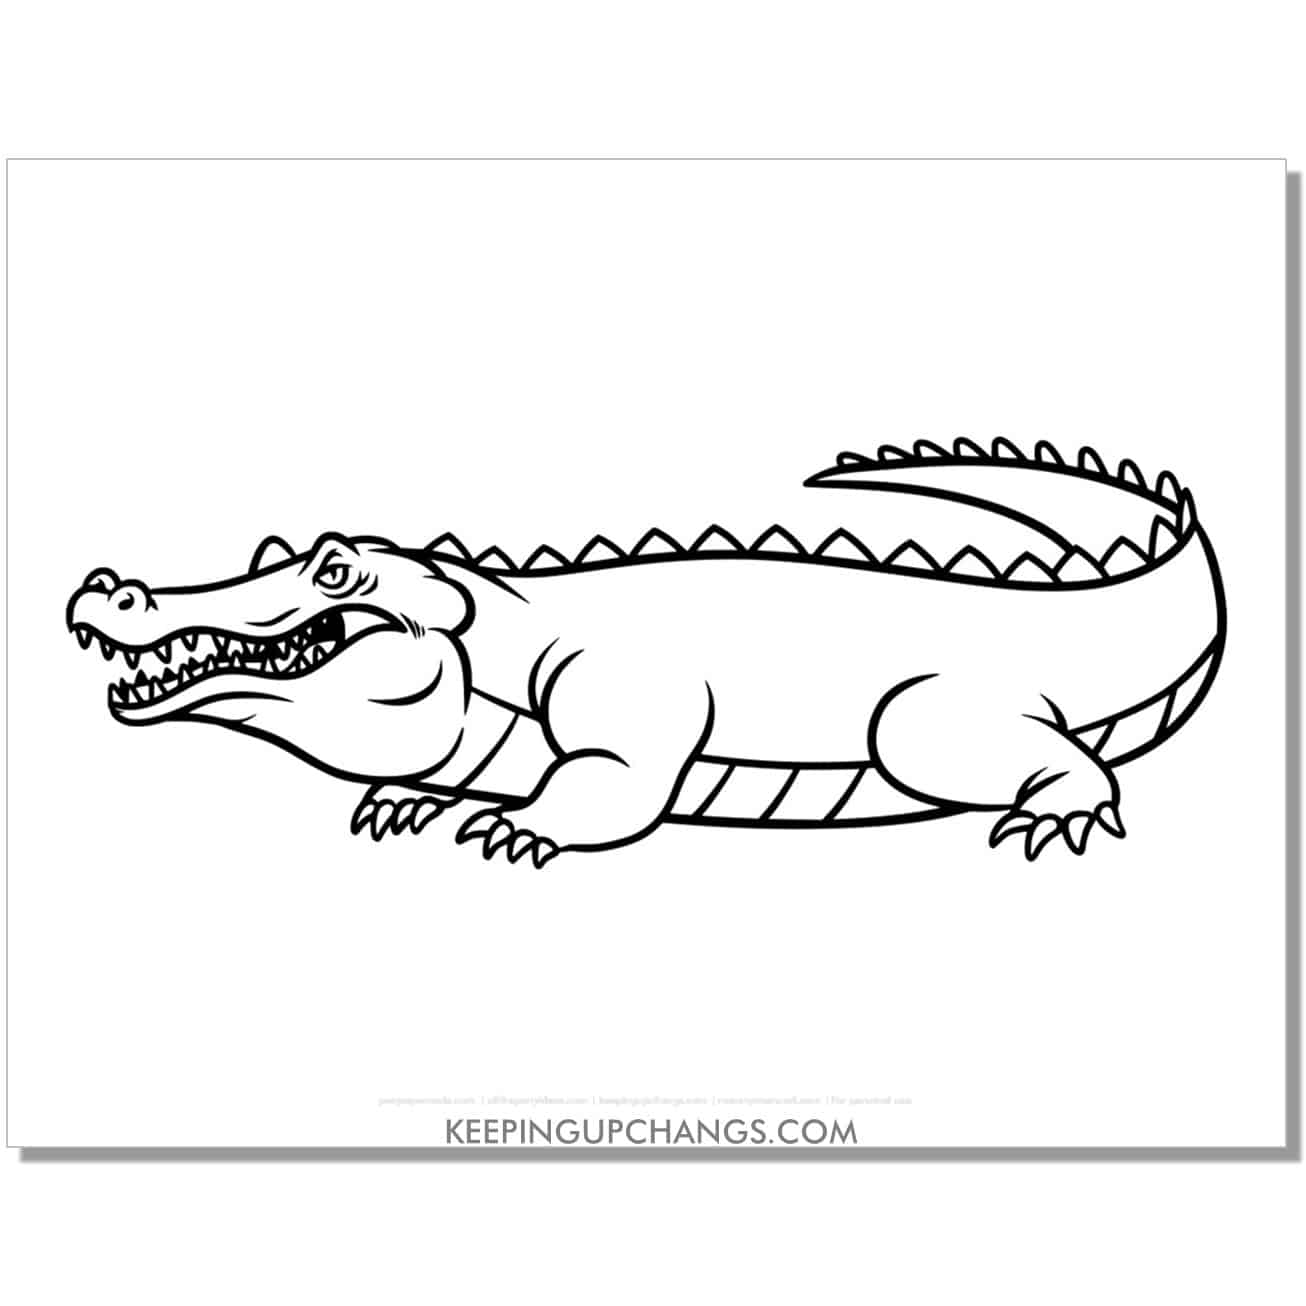 free angry alligator, crocodile coloring page, sheet.